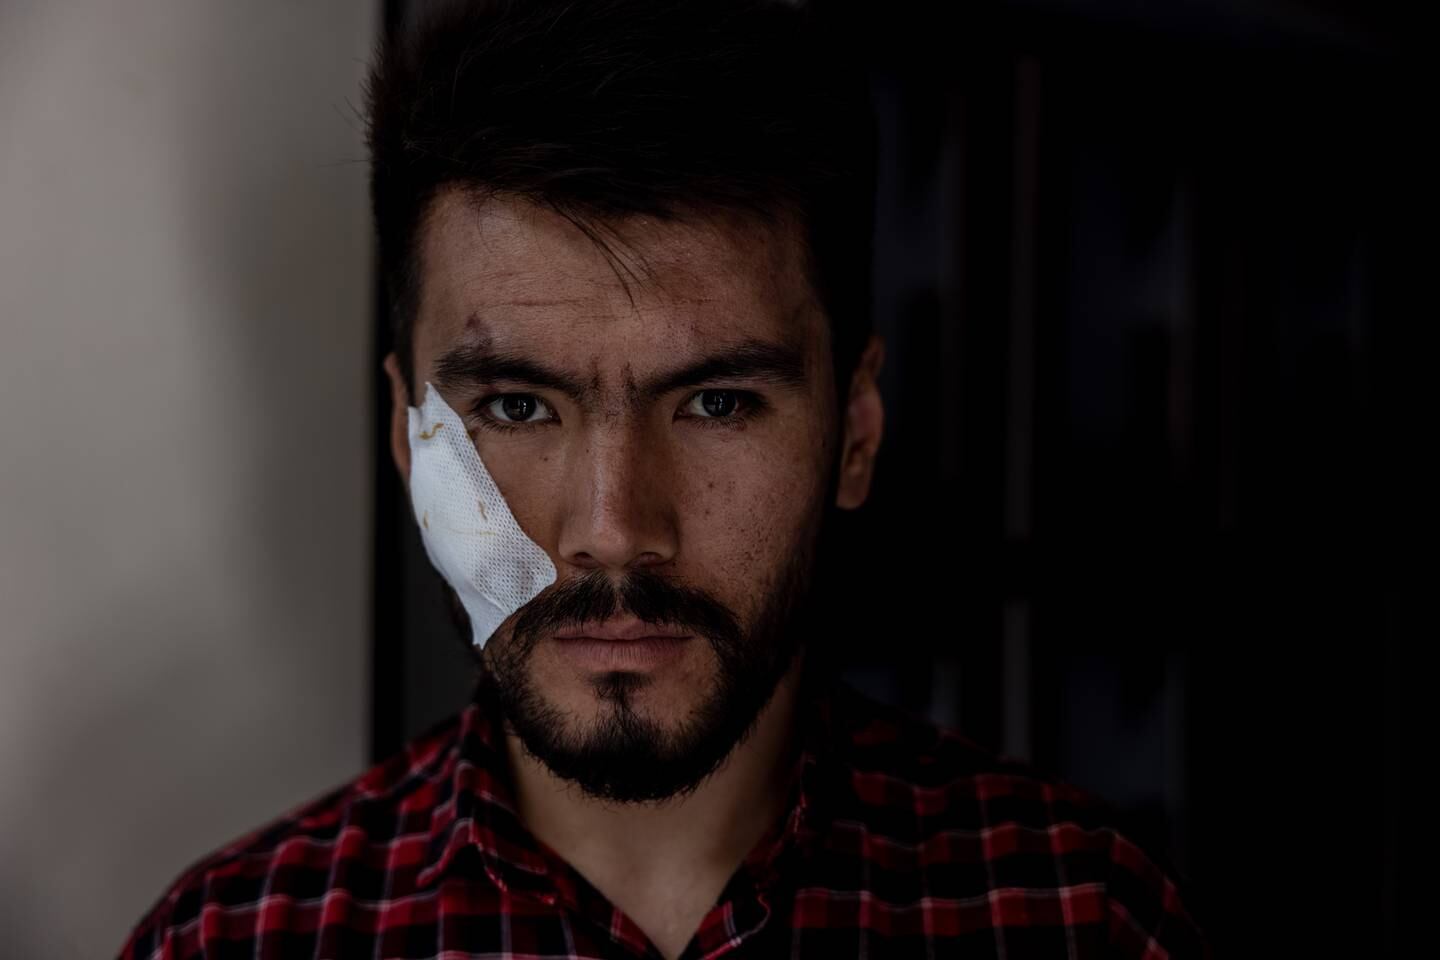 Nehmatullah Naqdi, 28, a video journalist with the EtilaatRoz newspaper, was also severely beaten by the Taliban. 